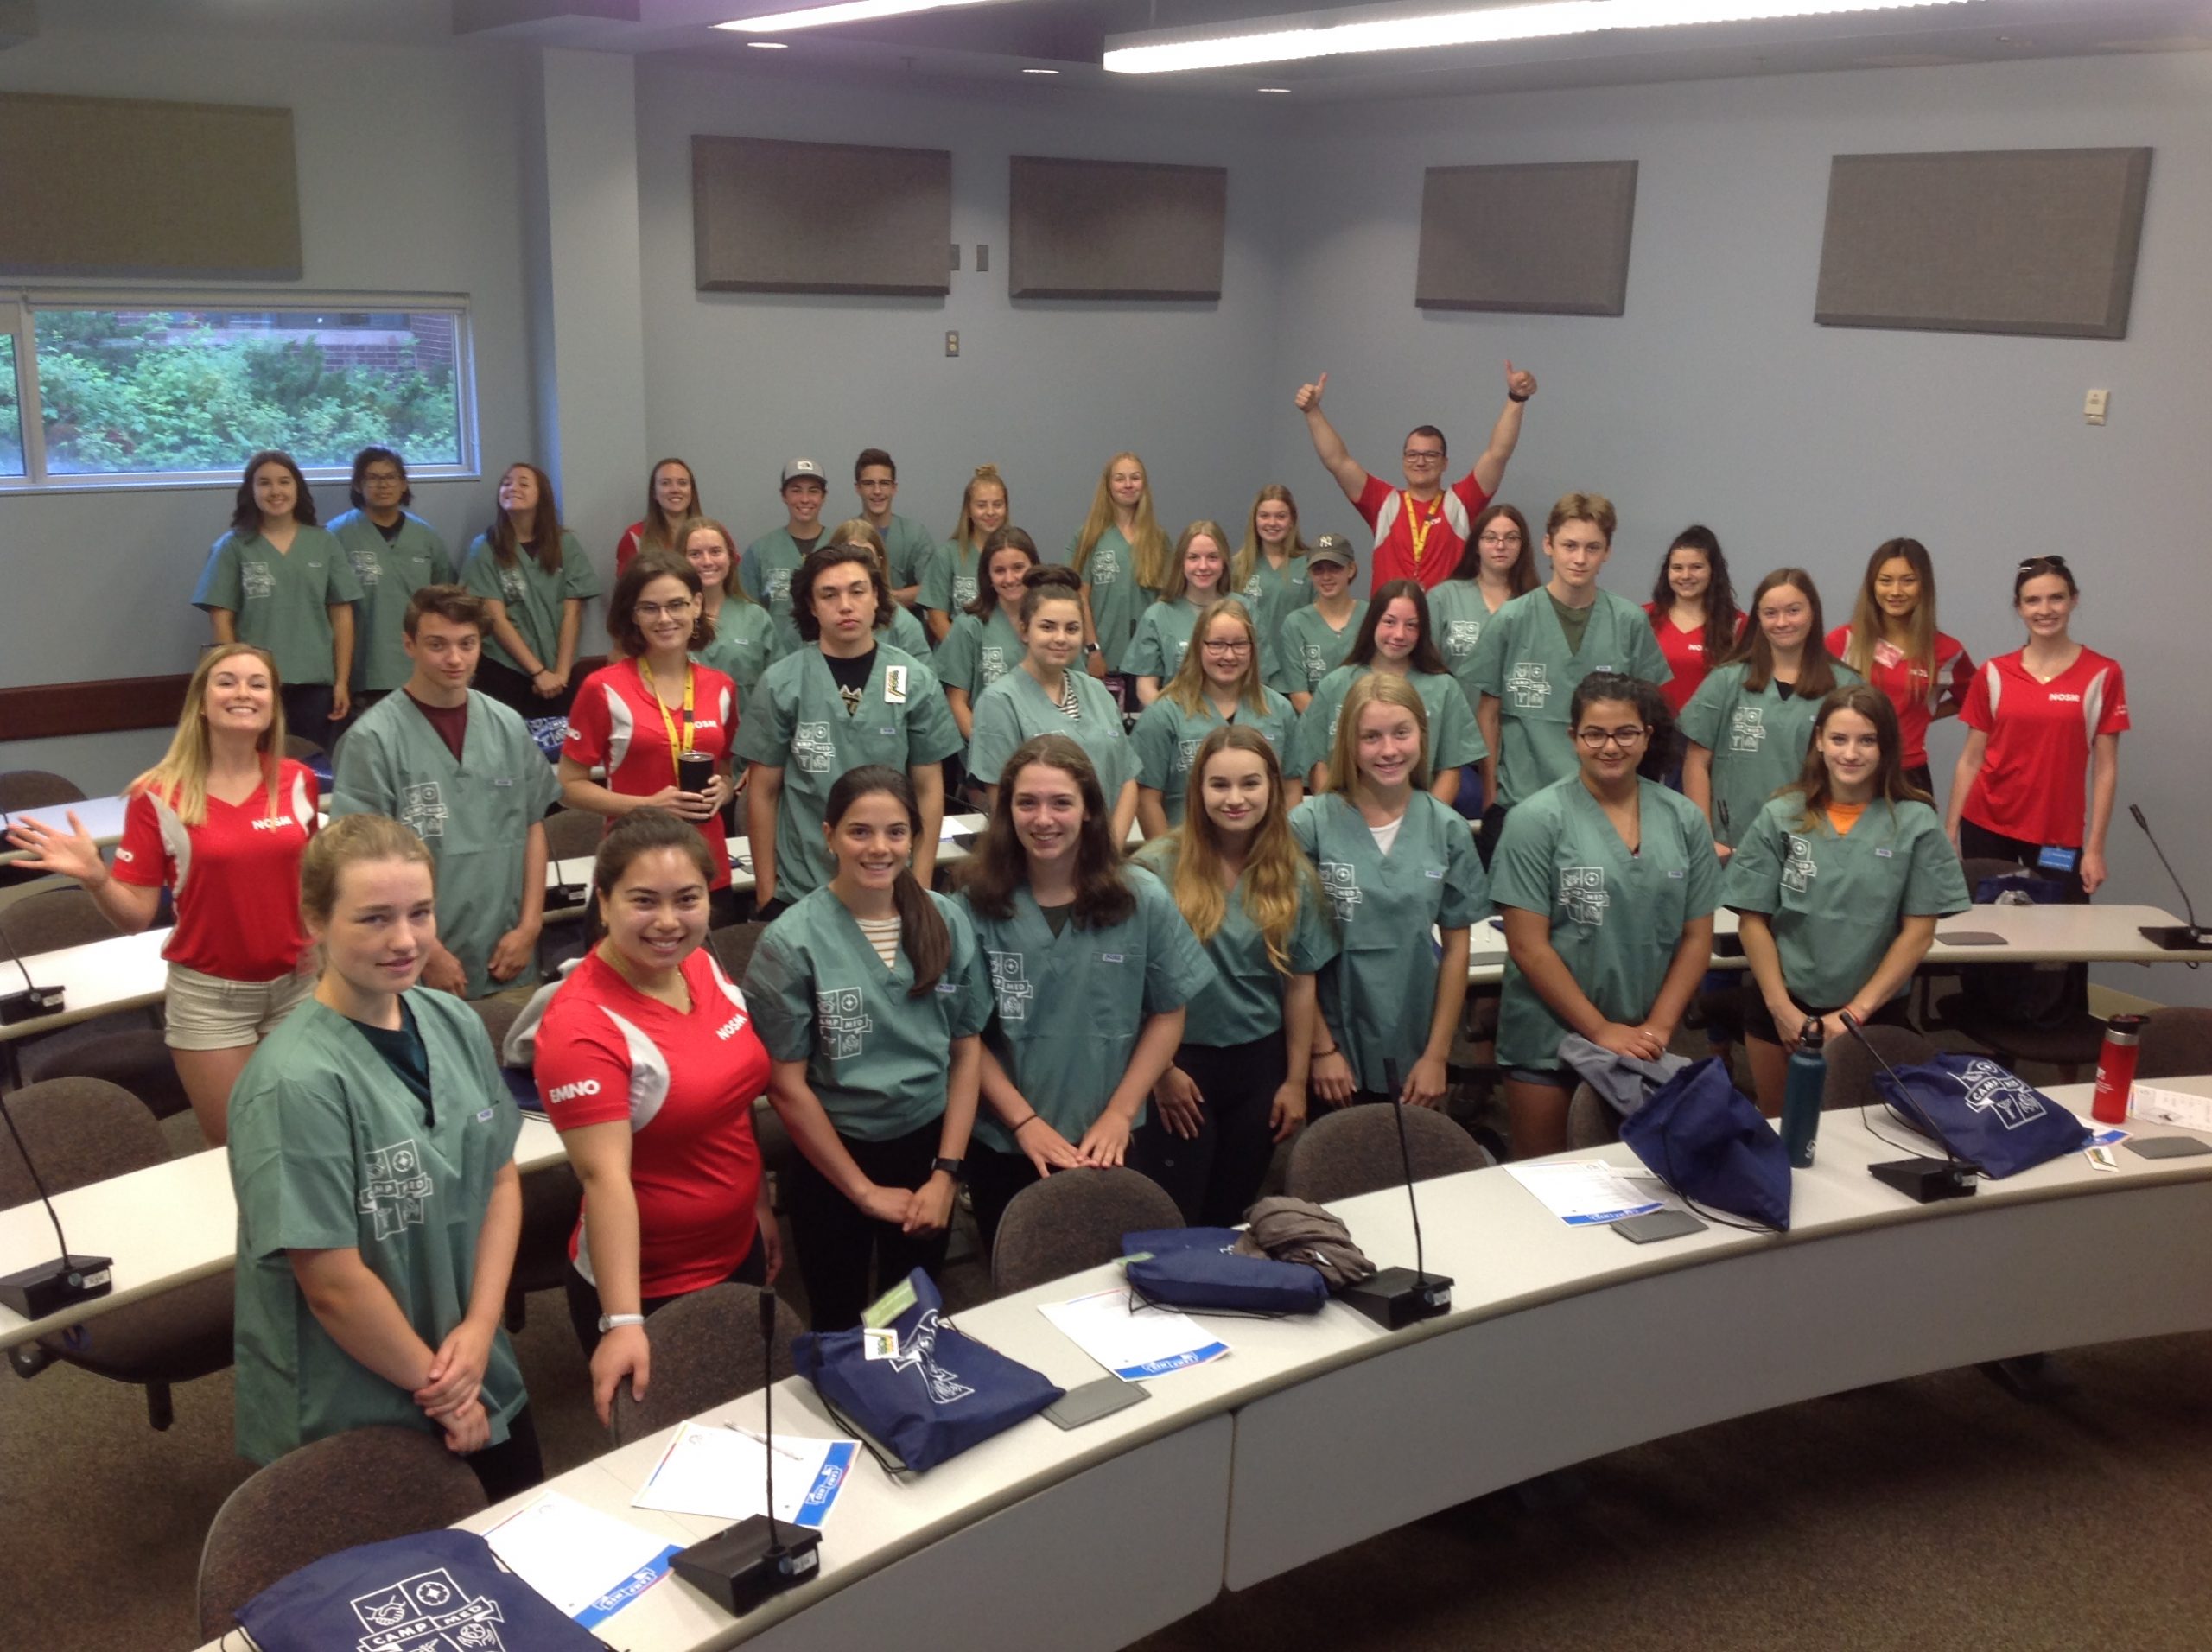 Group shot of campers and team leads in lecture style classroom in Thunder Bay.